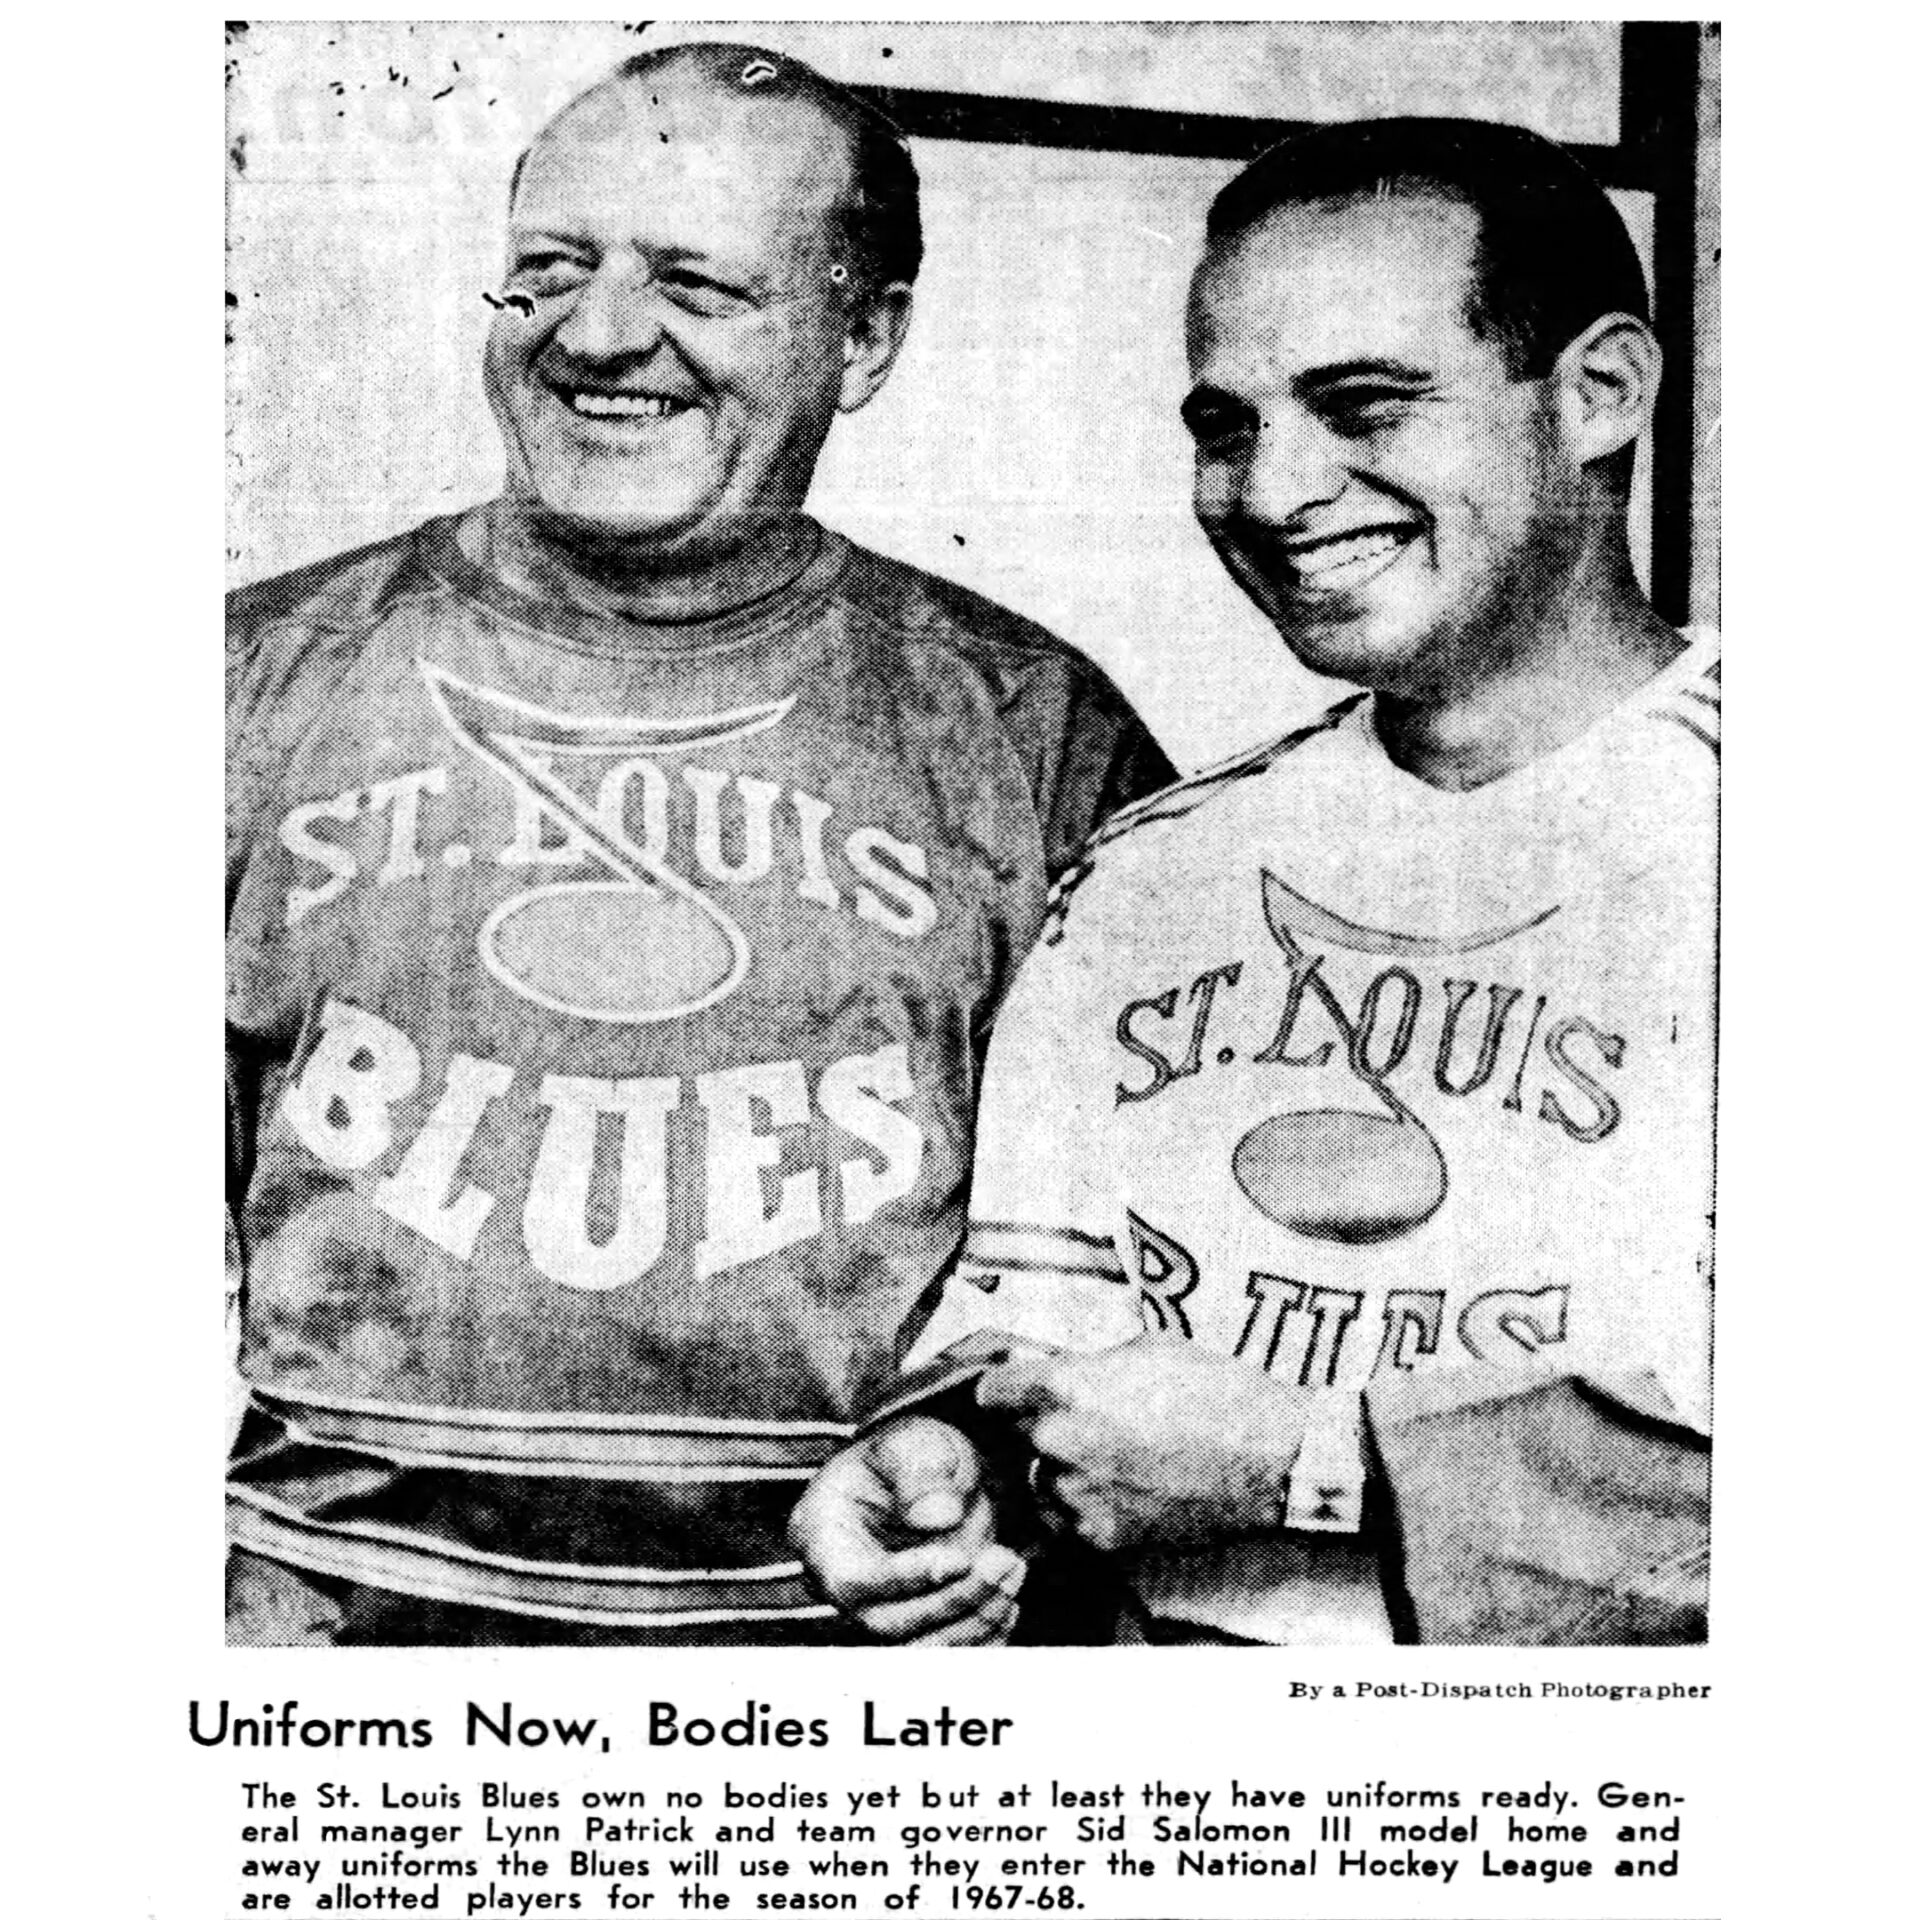 This Day In Hockey History -February 11- Vancouver snubbed coldly, brutally, as St Louis awarded expansion franchise before the Canucks.